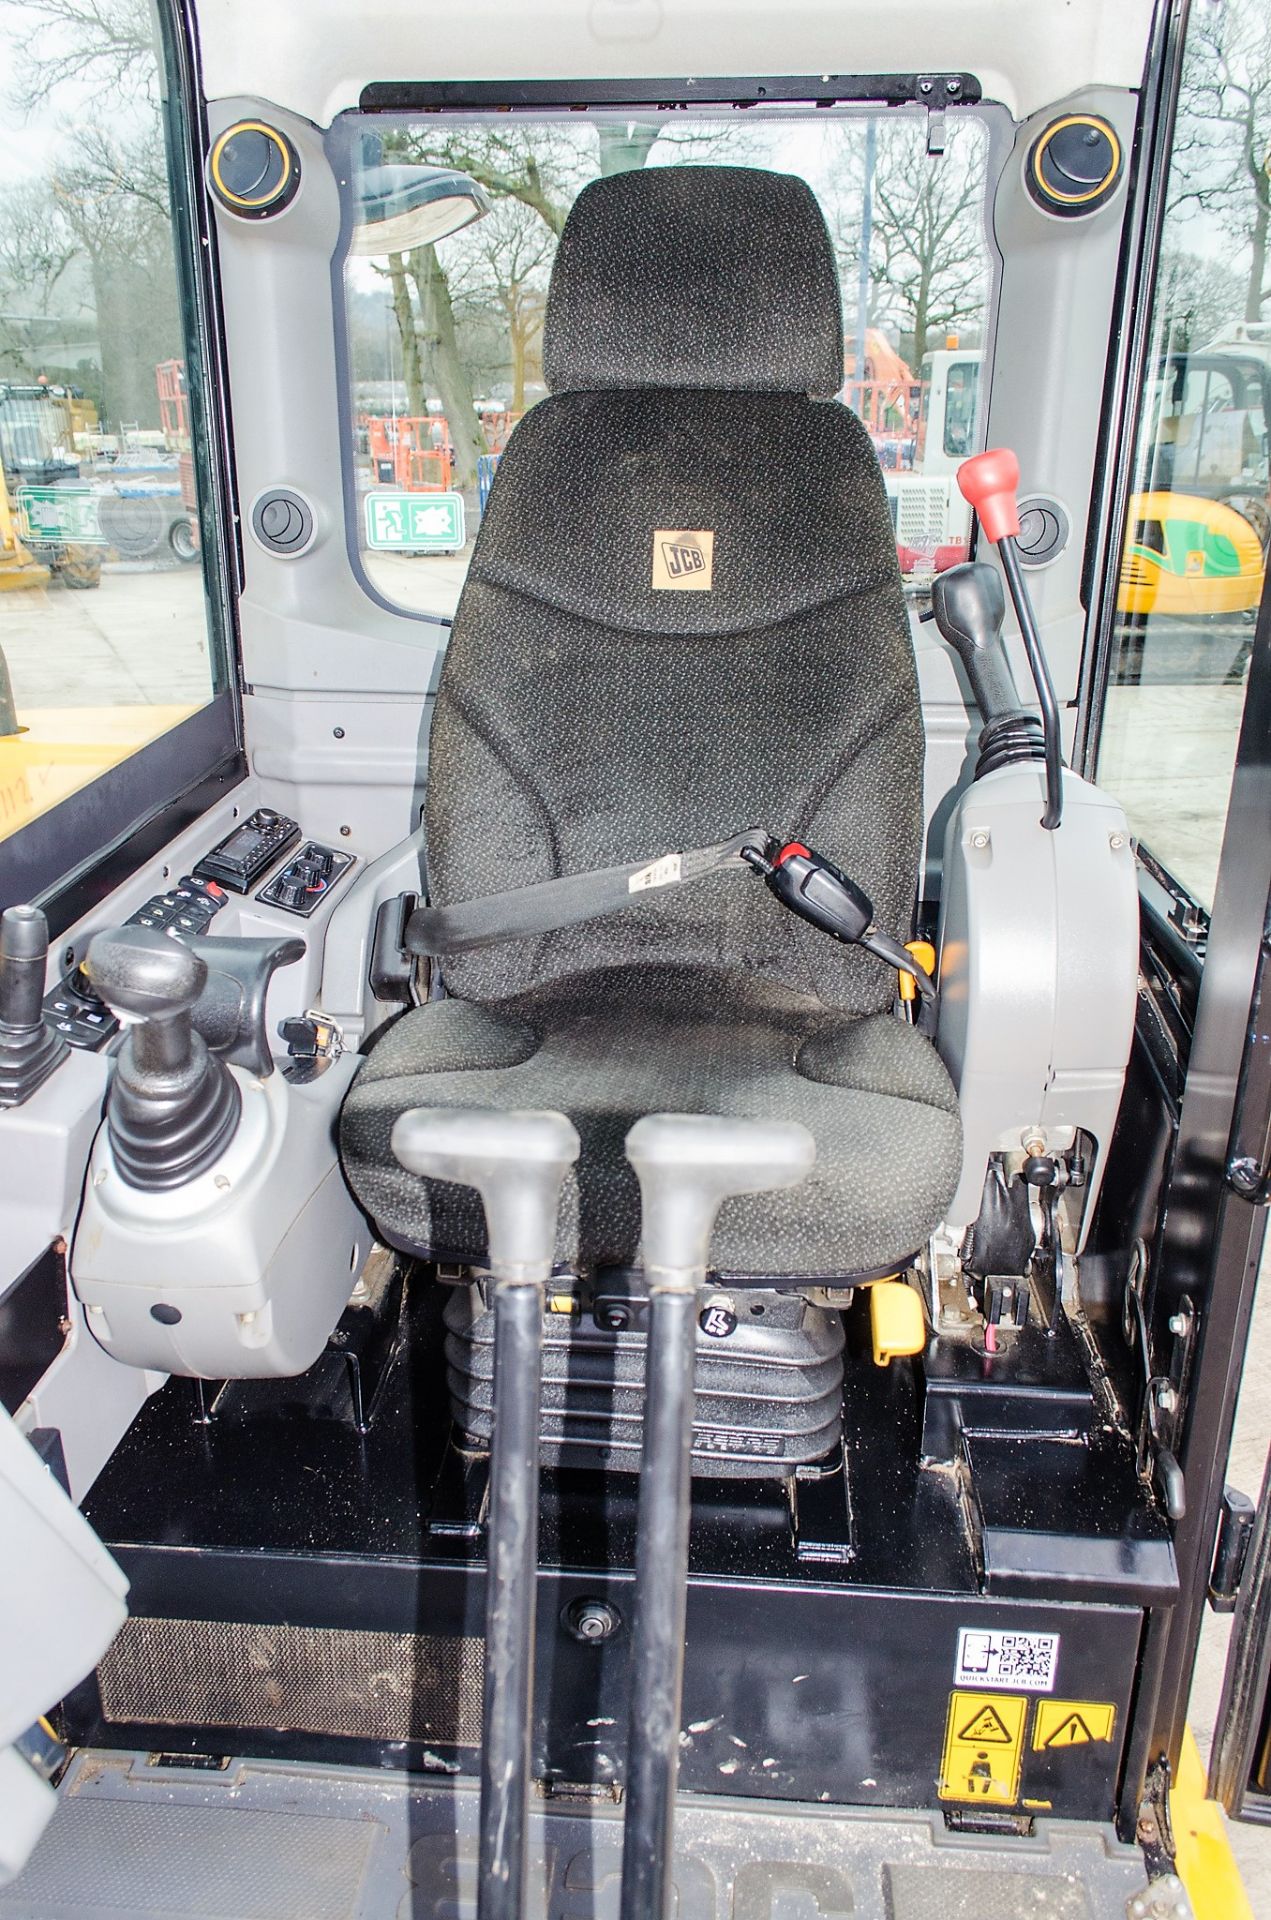 JCB 85 Z-2 Groundworker 8.5 tonne rubber tracked excavator Year: 2020 S/N: 2735673 Recorded Hours: - Image 24 of 29